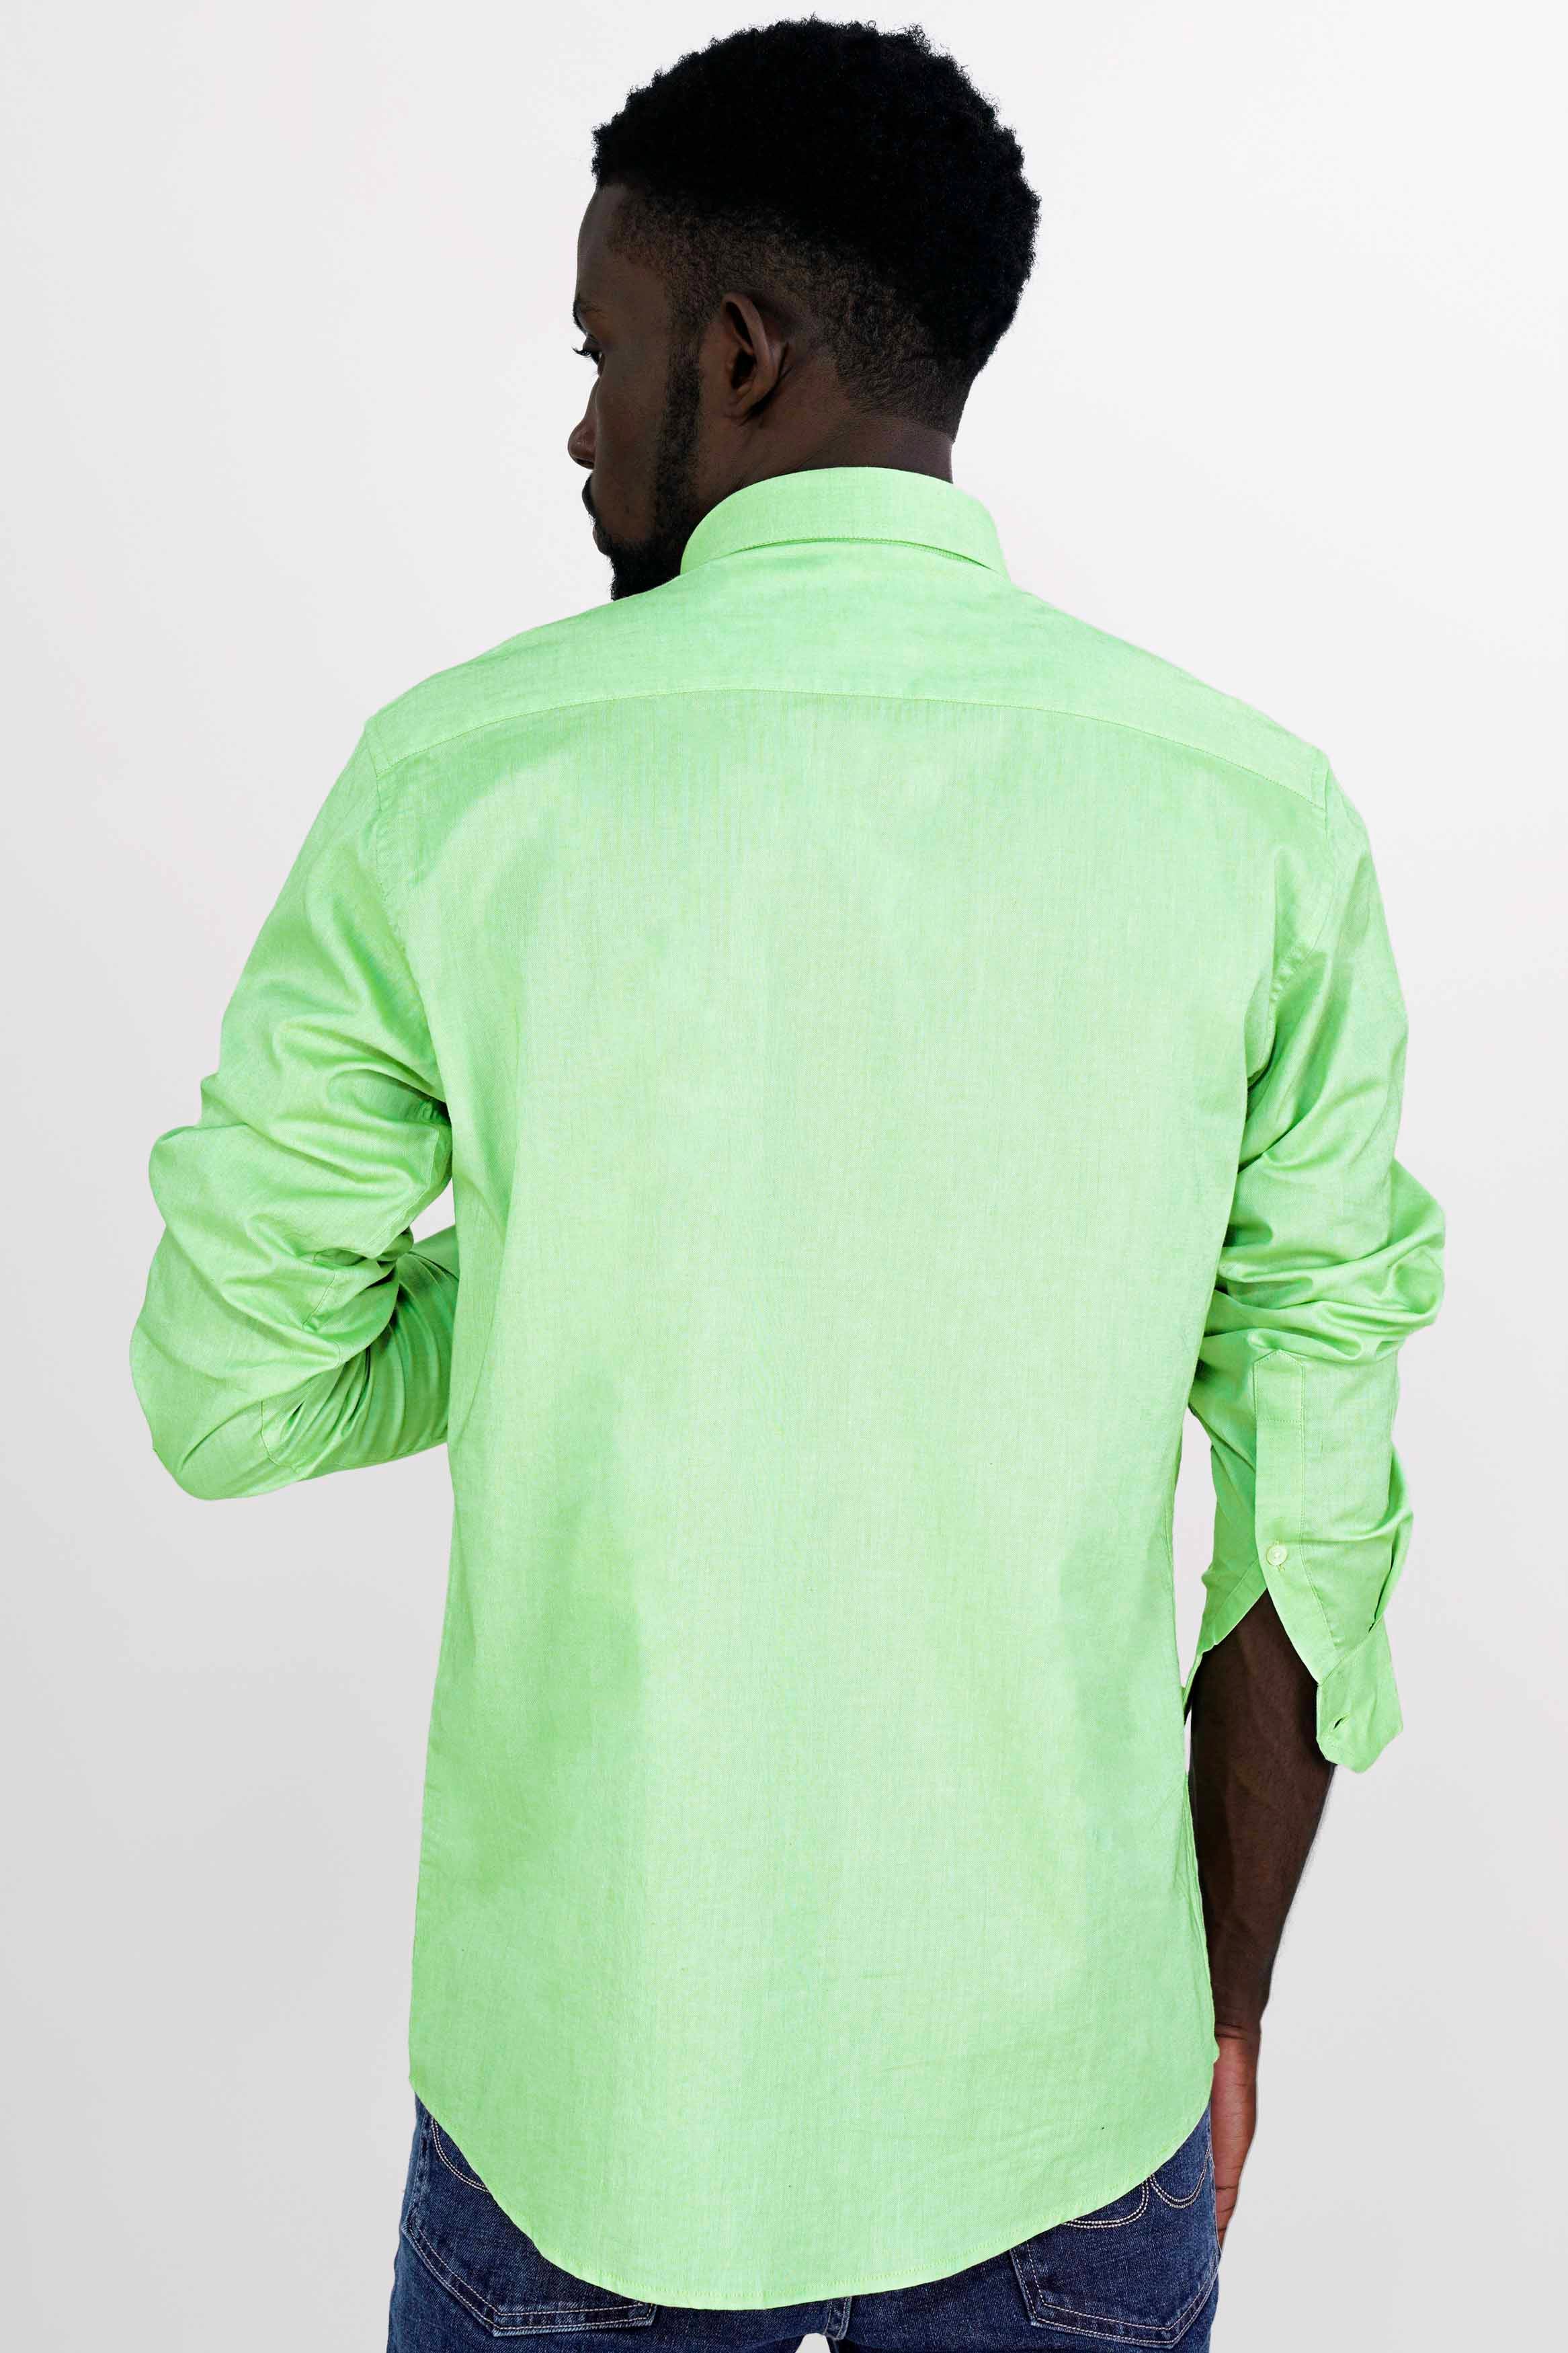 Feijoa Green Hand Painted Royal Oxford Designer Shirt 6407-BD-ART-38, 6407-BD-ART-H-38, 6407-BD-ART-39, 6407-BD-ART-H-39, 6407-BD-ART-40, 6407-BD-ART-H-40, 6407-BD-ART-42, 6407-BD-ART-H-42, 6407-BD-ART-44, 6407-BD-ART-H-44, 6407-BD-ART-46, 6407-BD-ART-H-46, 6407-BD-ART-48, 6407-BD-ART-H-48, 6407-BD-ART-50, 6407-BD-ART-H-50, 6407-BD-ART-52, 6407-BD-ART-H-52